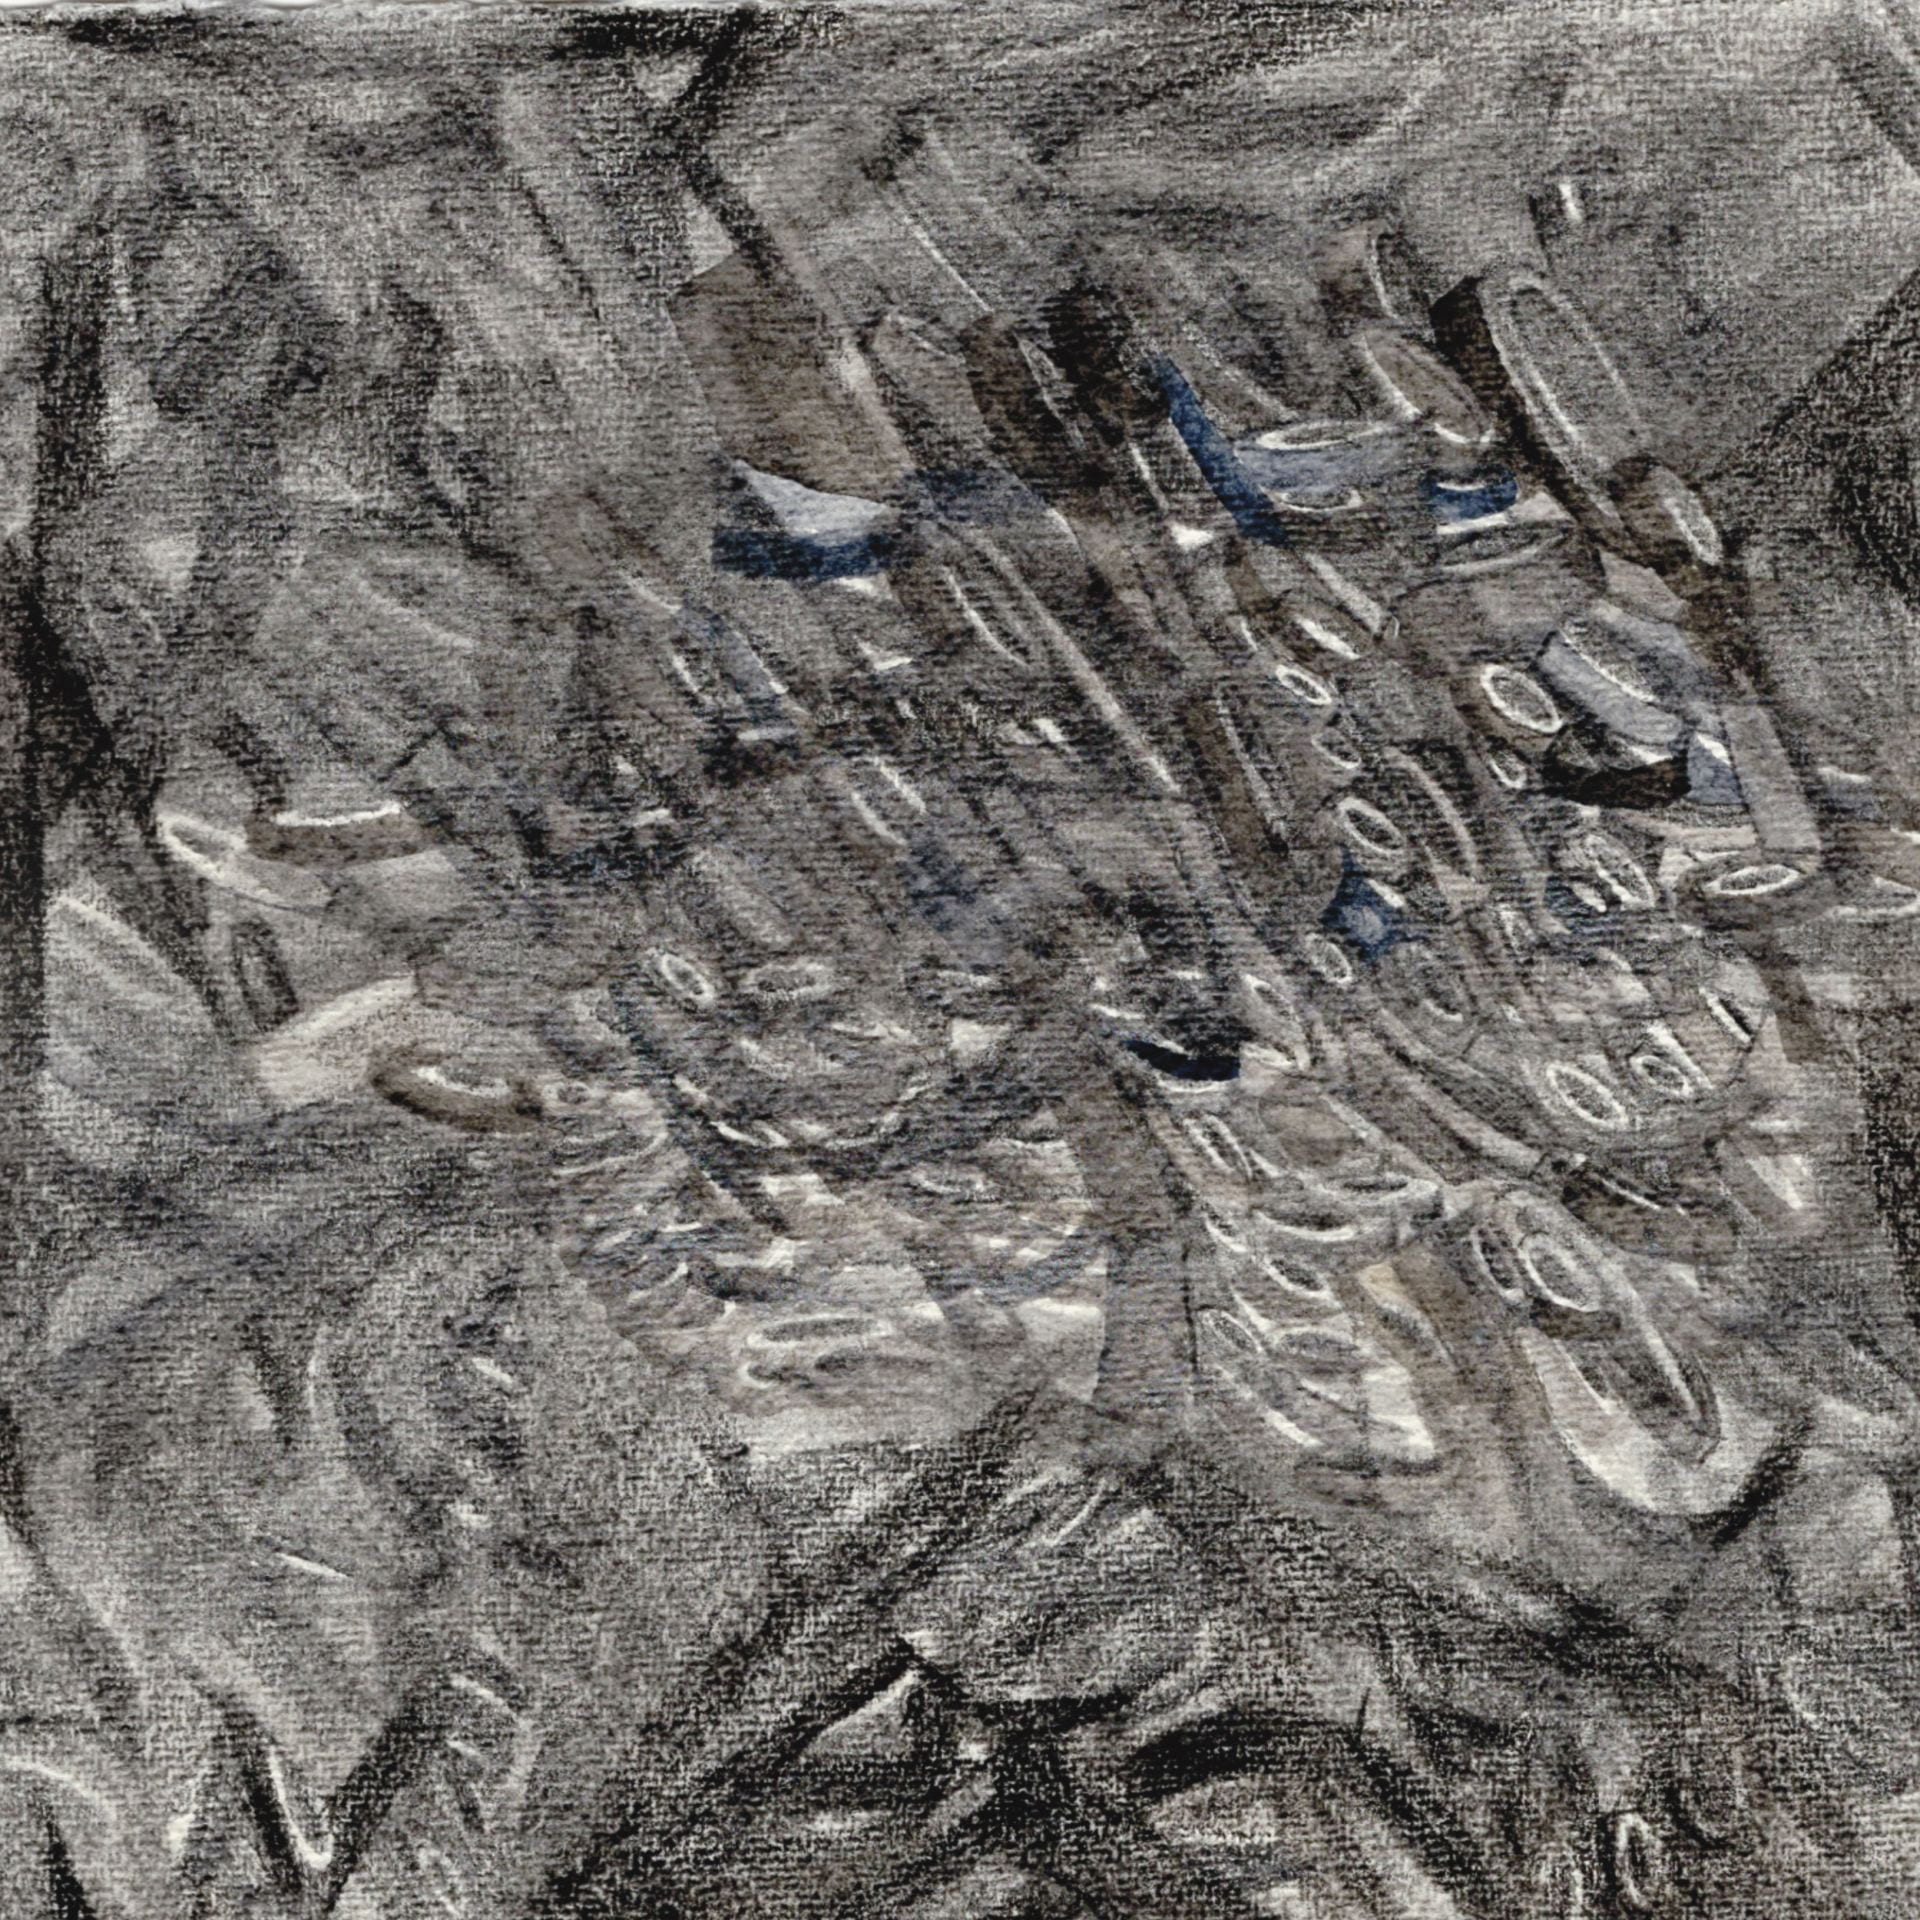 An image of a scribbled, graphite surface.